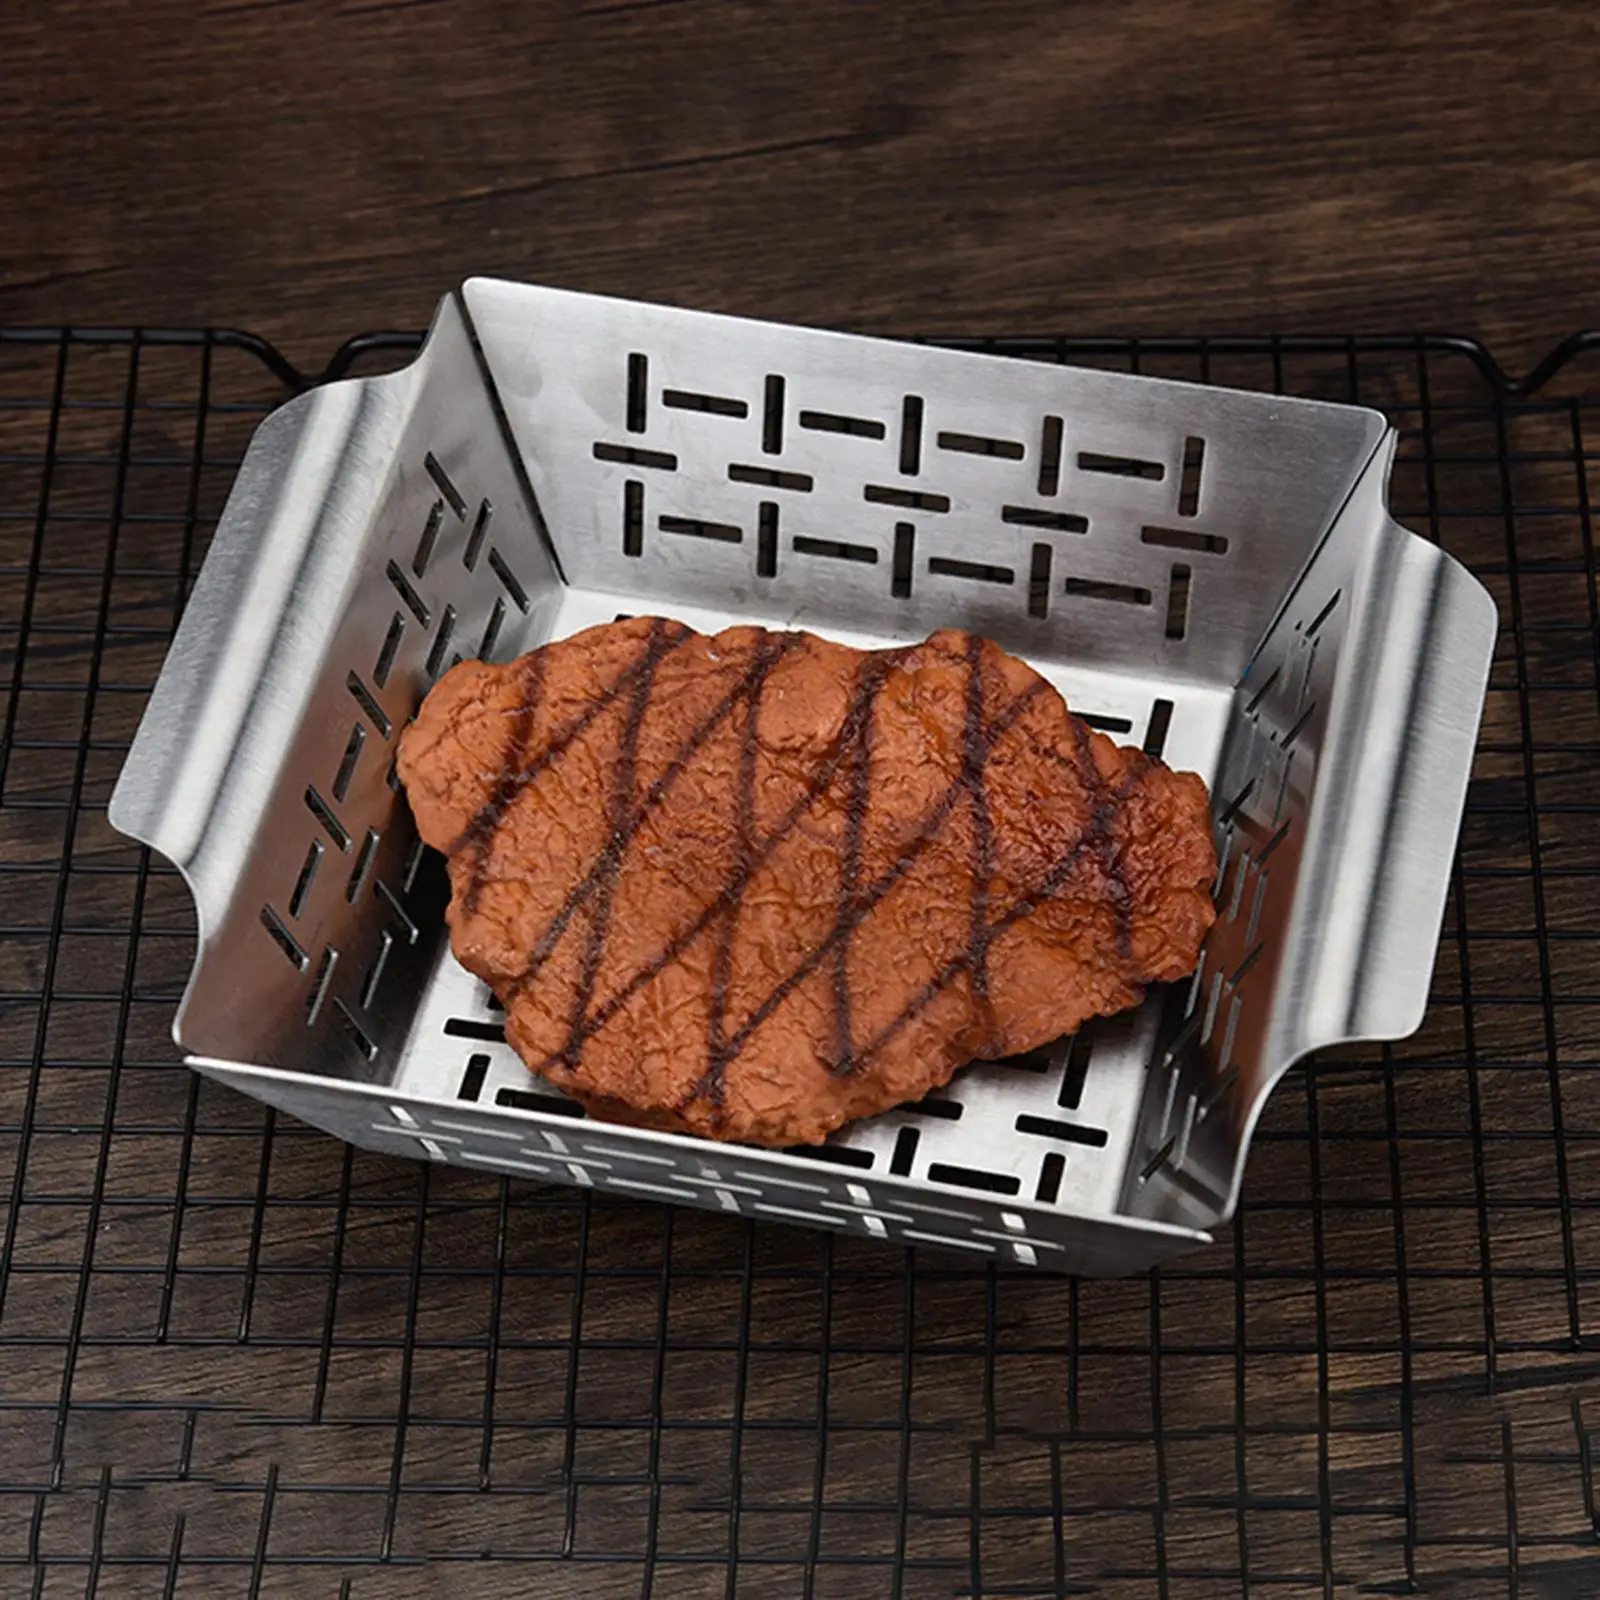 Stainless Steel Roast Fish Grilling Basket BBQ Accessories BBQ Grill Pan Outdoor Grill Grilling Bowl Barbecue Plate Leakage